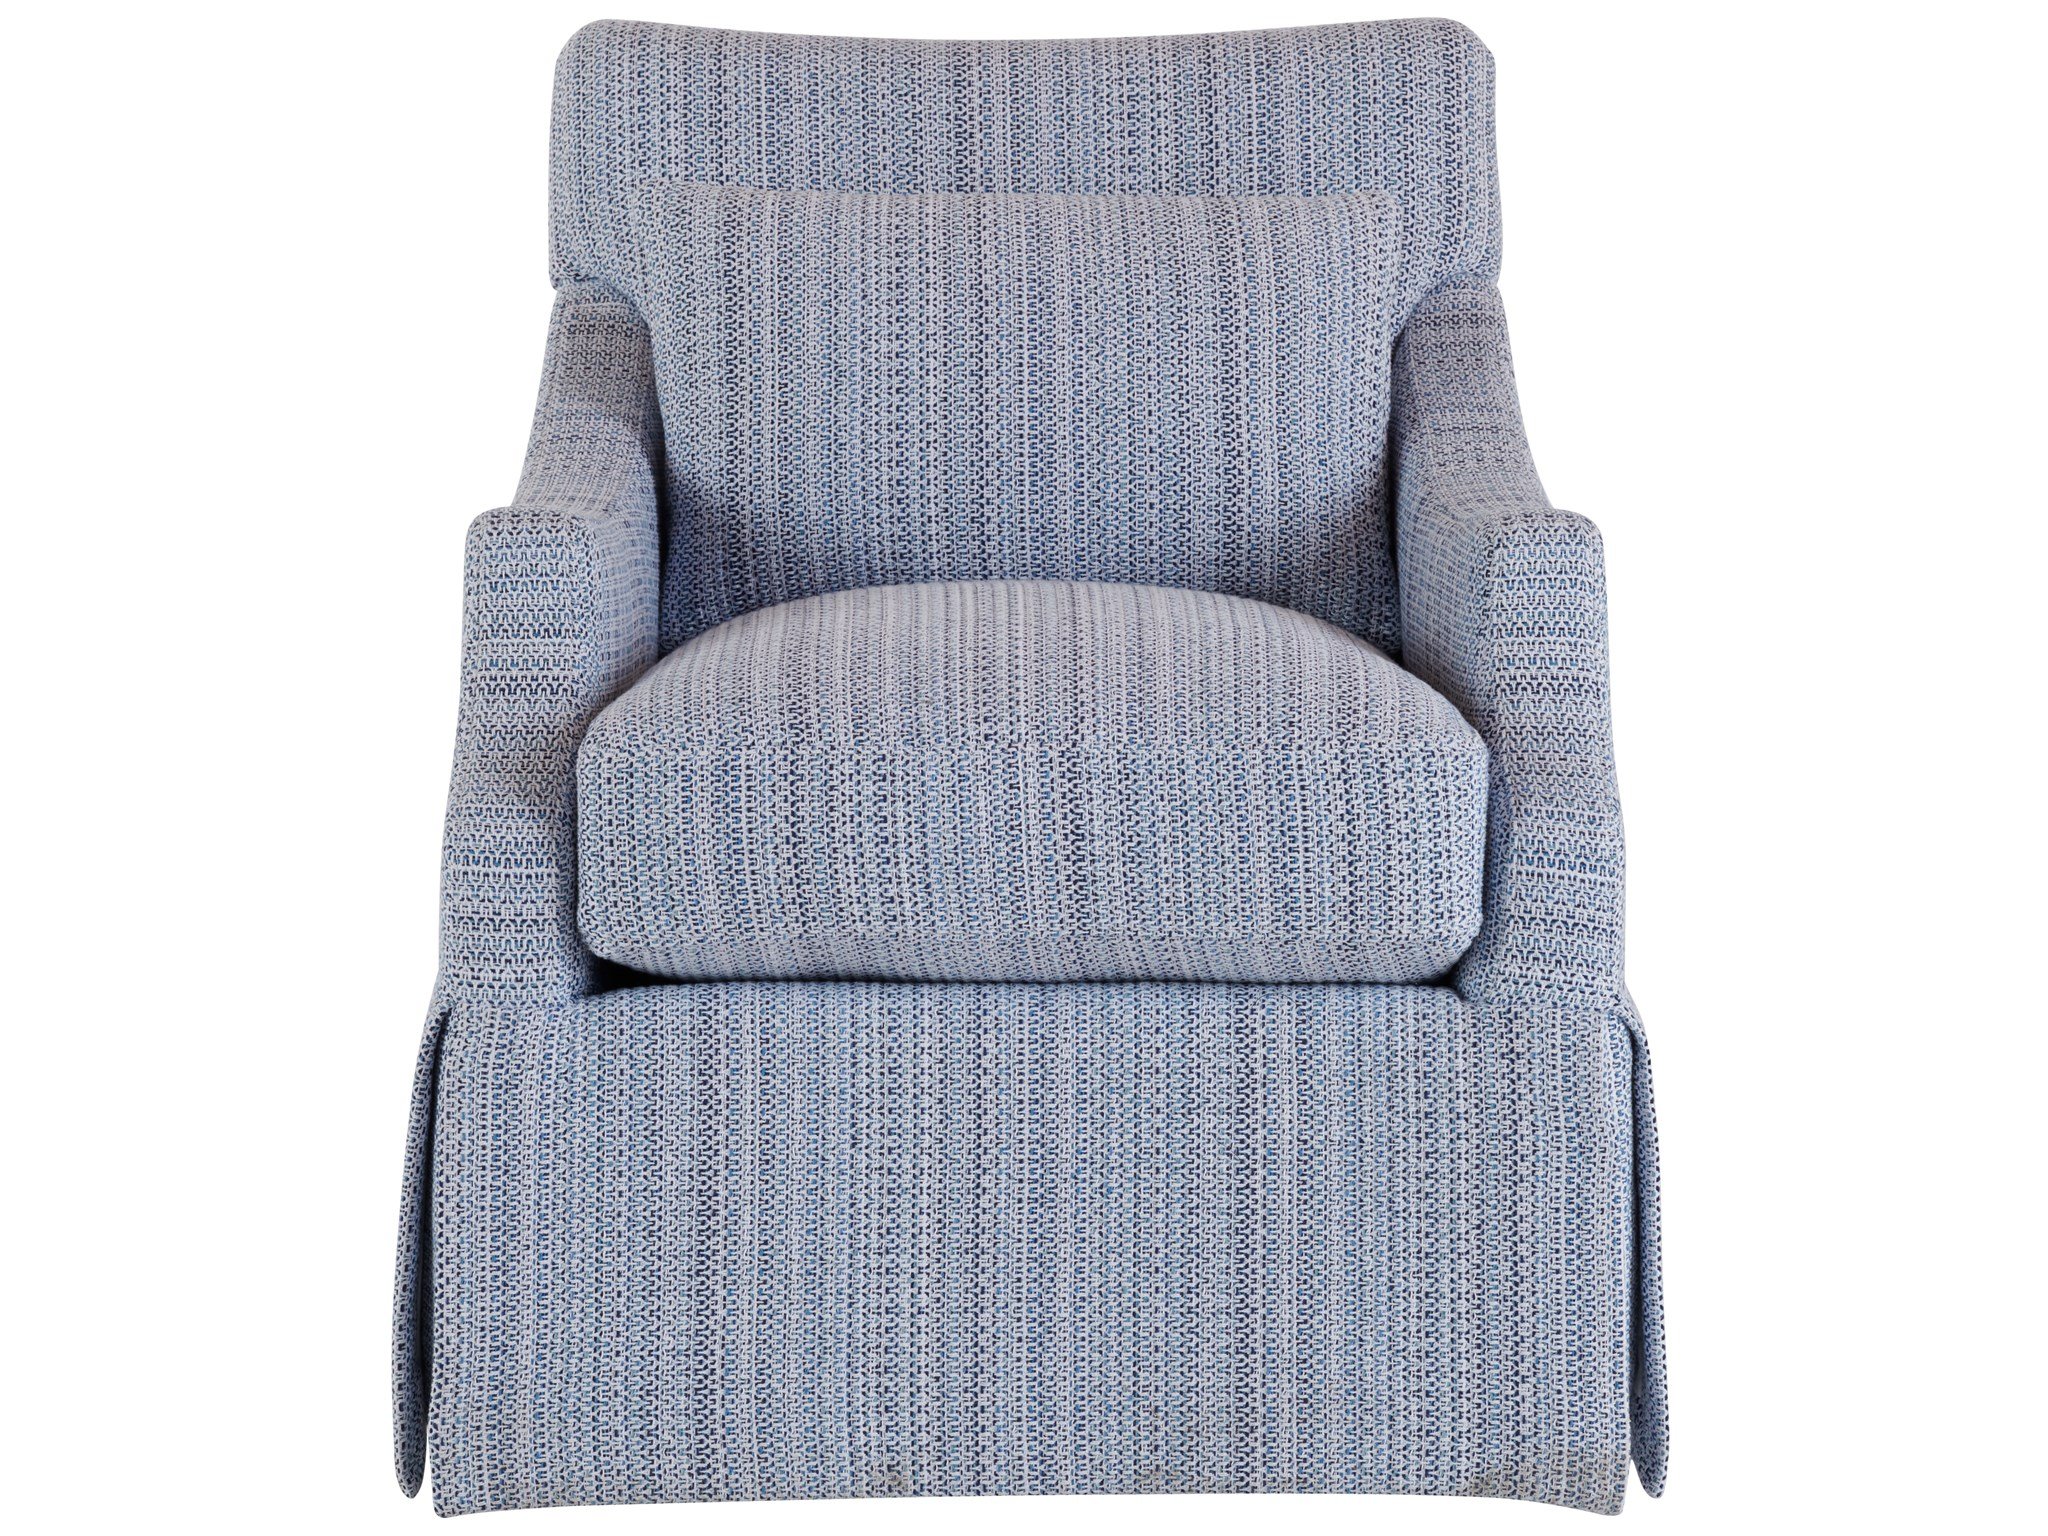 Margaux Accent Chair - Special Order